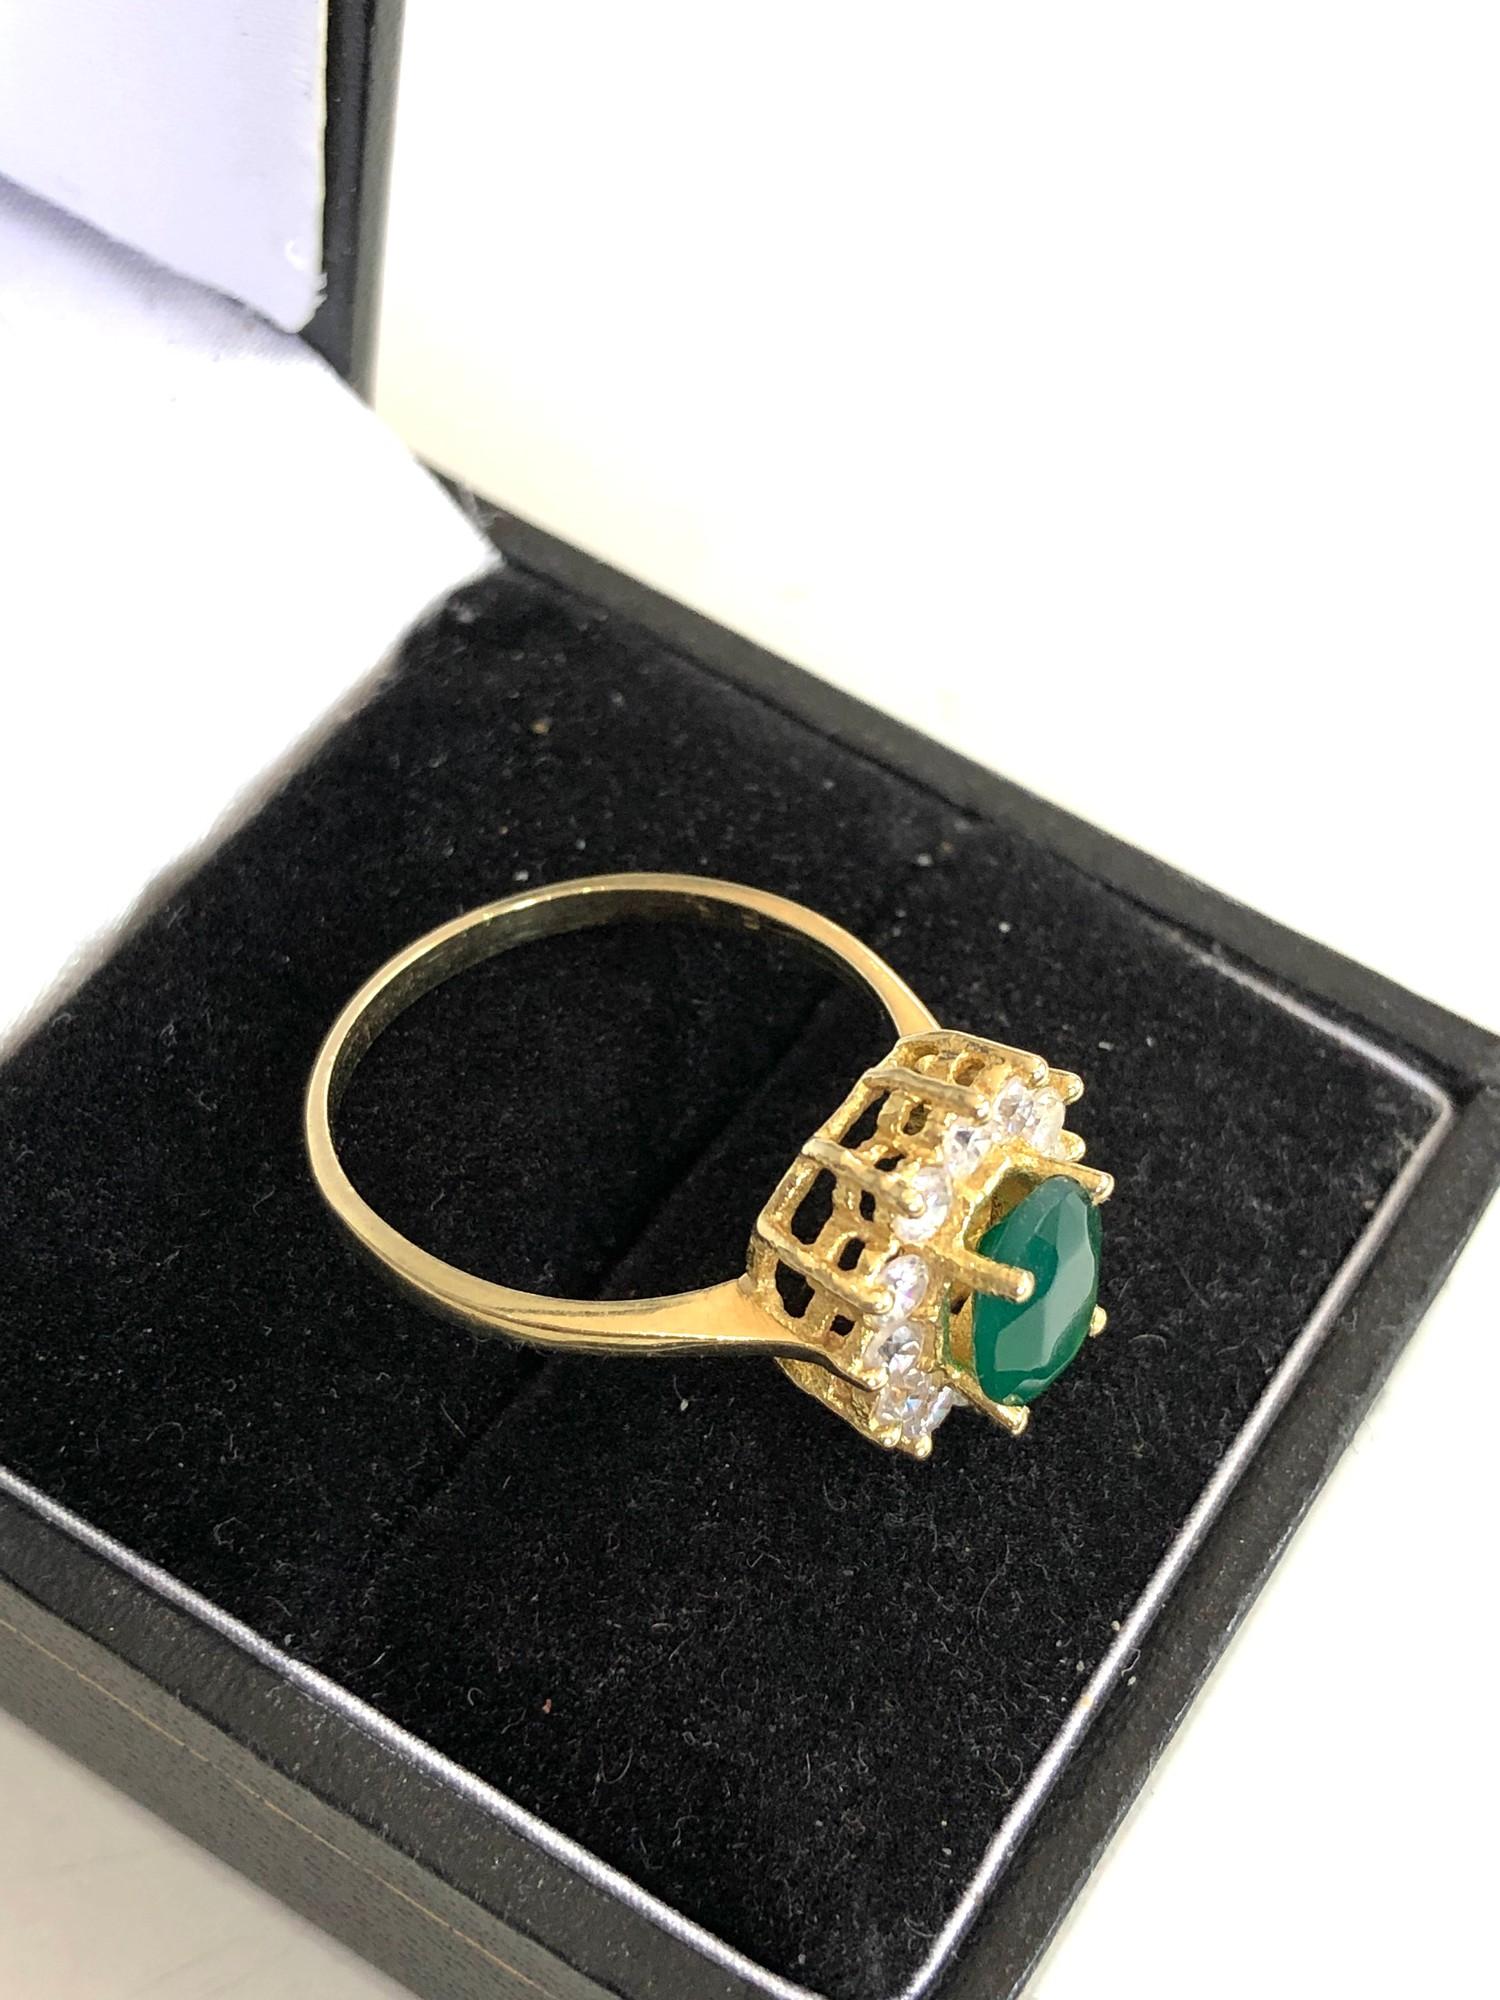 14ct gold stone set halo ring weight 2.9g - Image 3 of 4